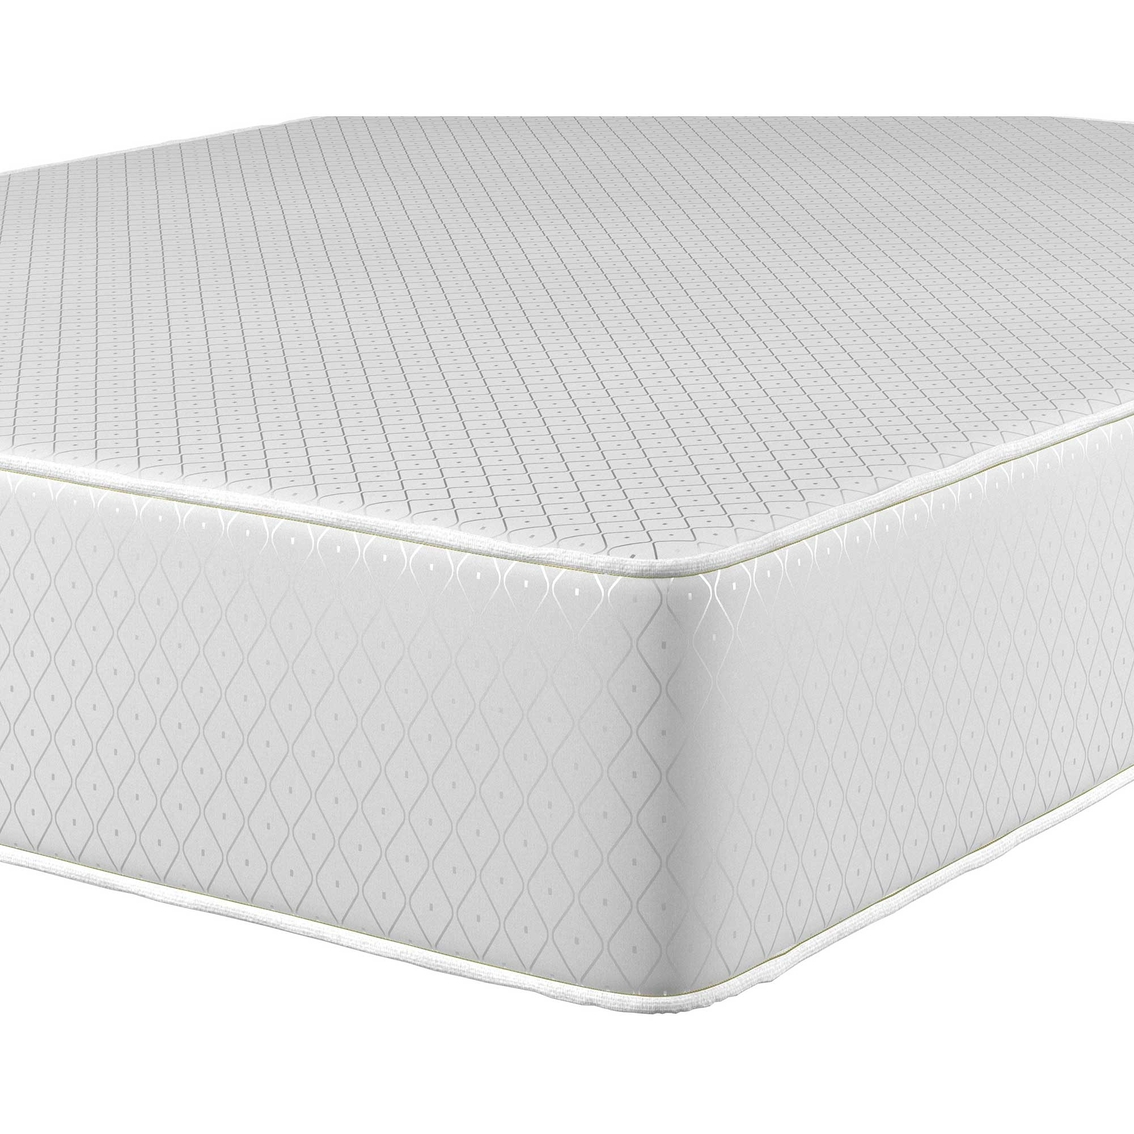 Eclipse Health-O-Pedic 10 in. Two Sided Foam Mattress - Image 5 of 5